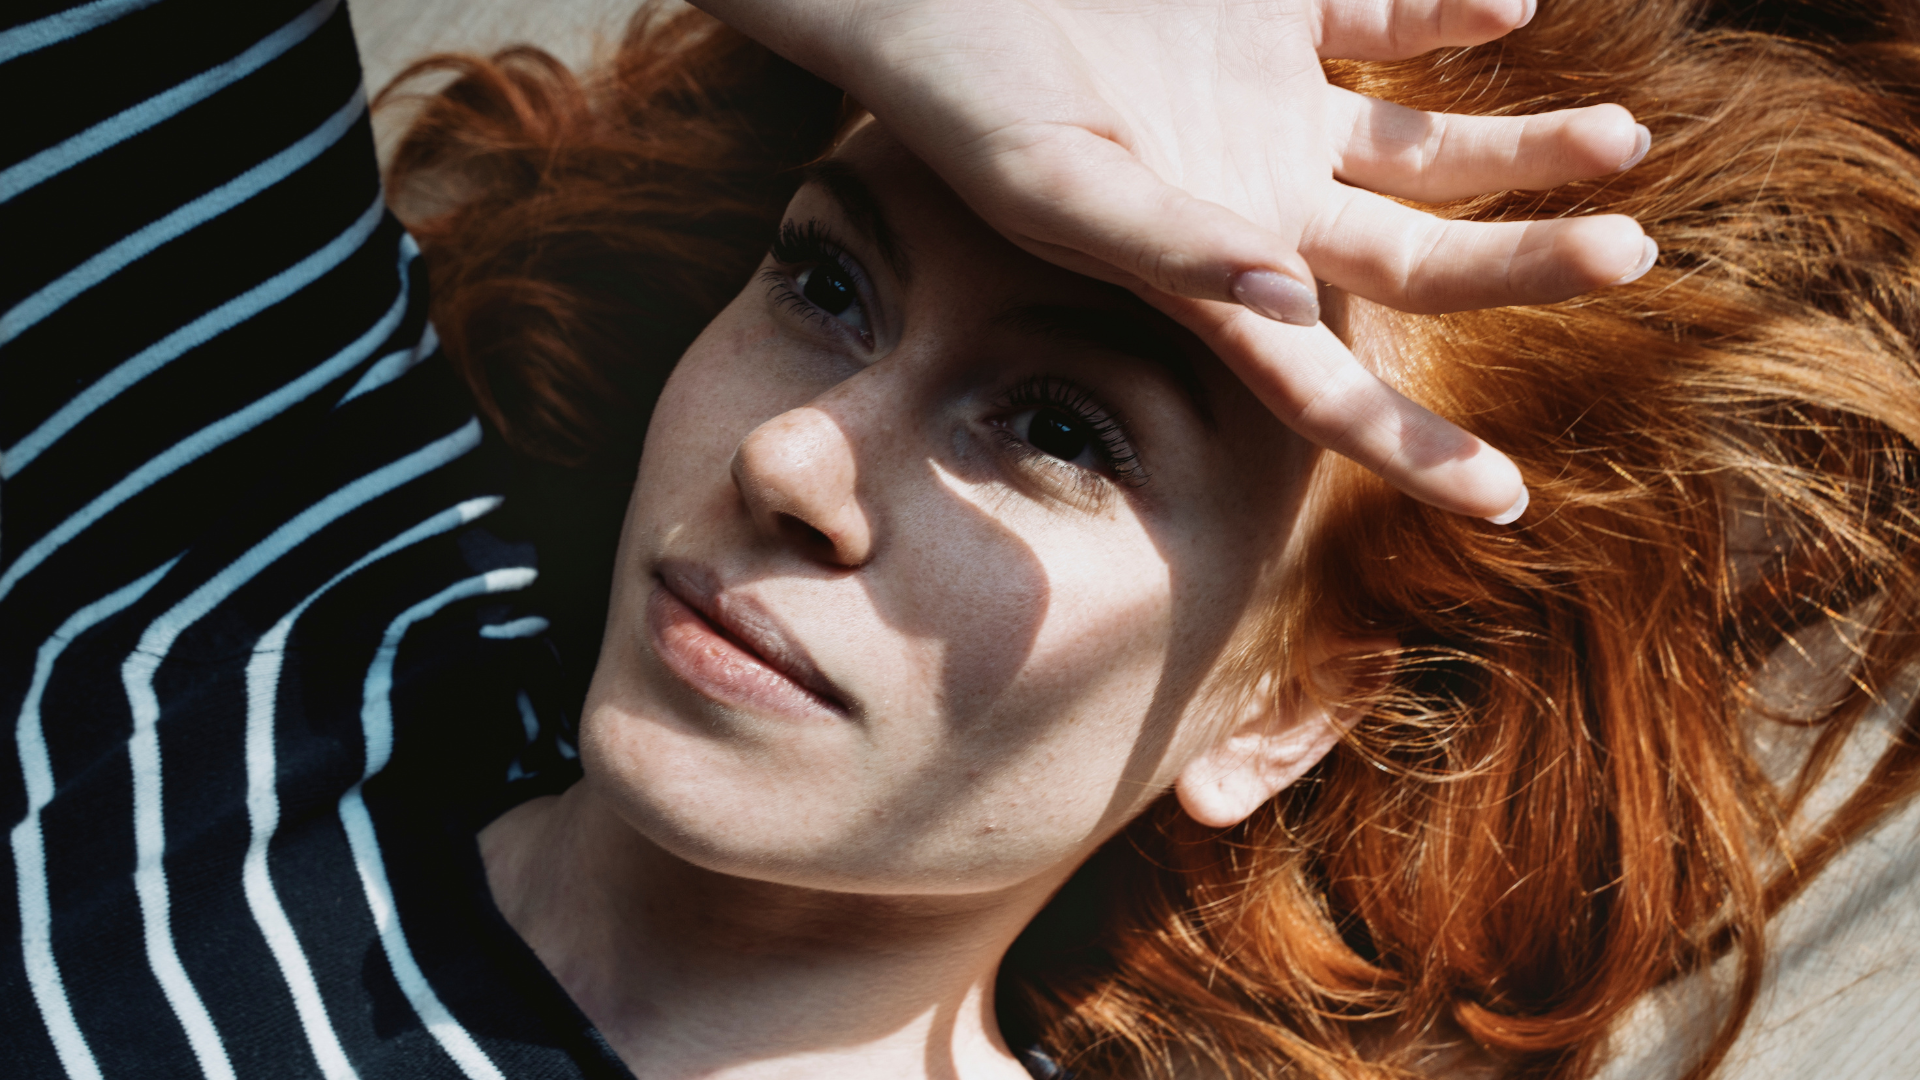 Simple Tips For Redheads: How To Repair Dry, Brittle, Cracked & Peeling Nails